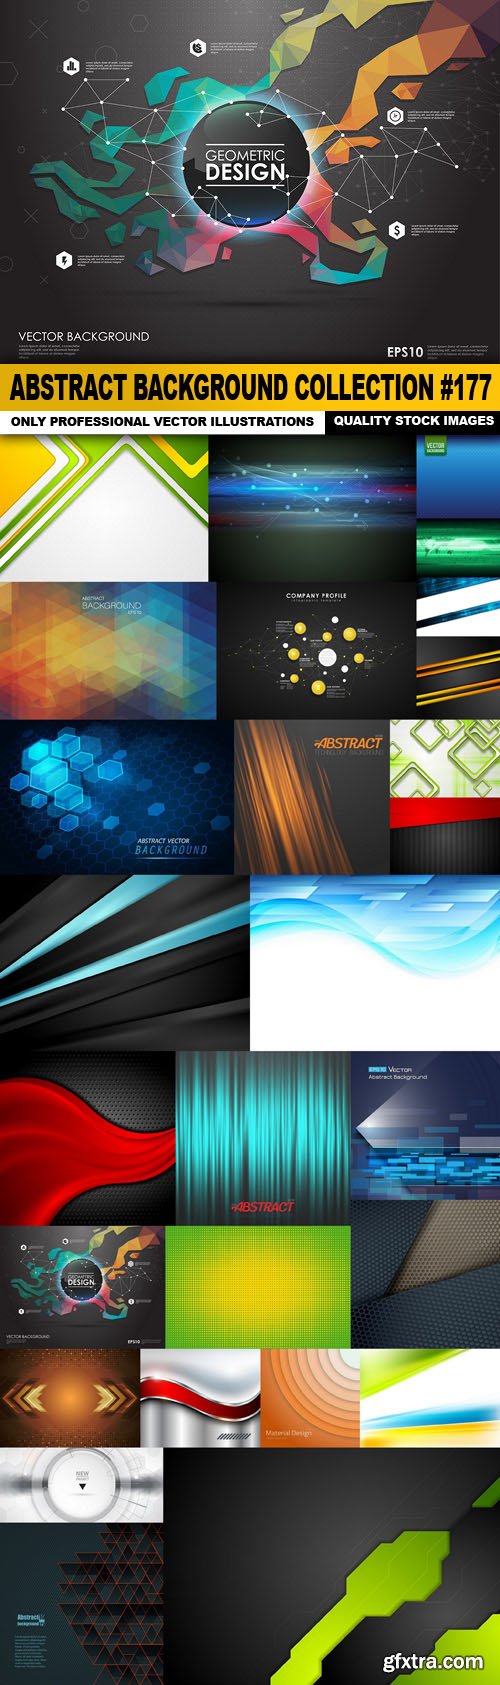 Abstract Background Collection #177 - 27 Vector